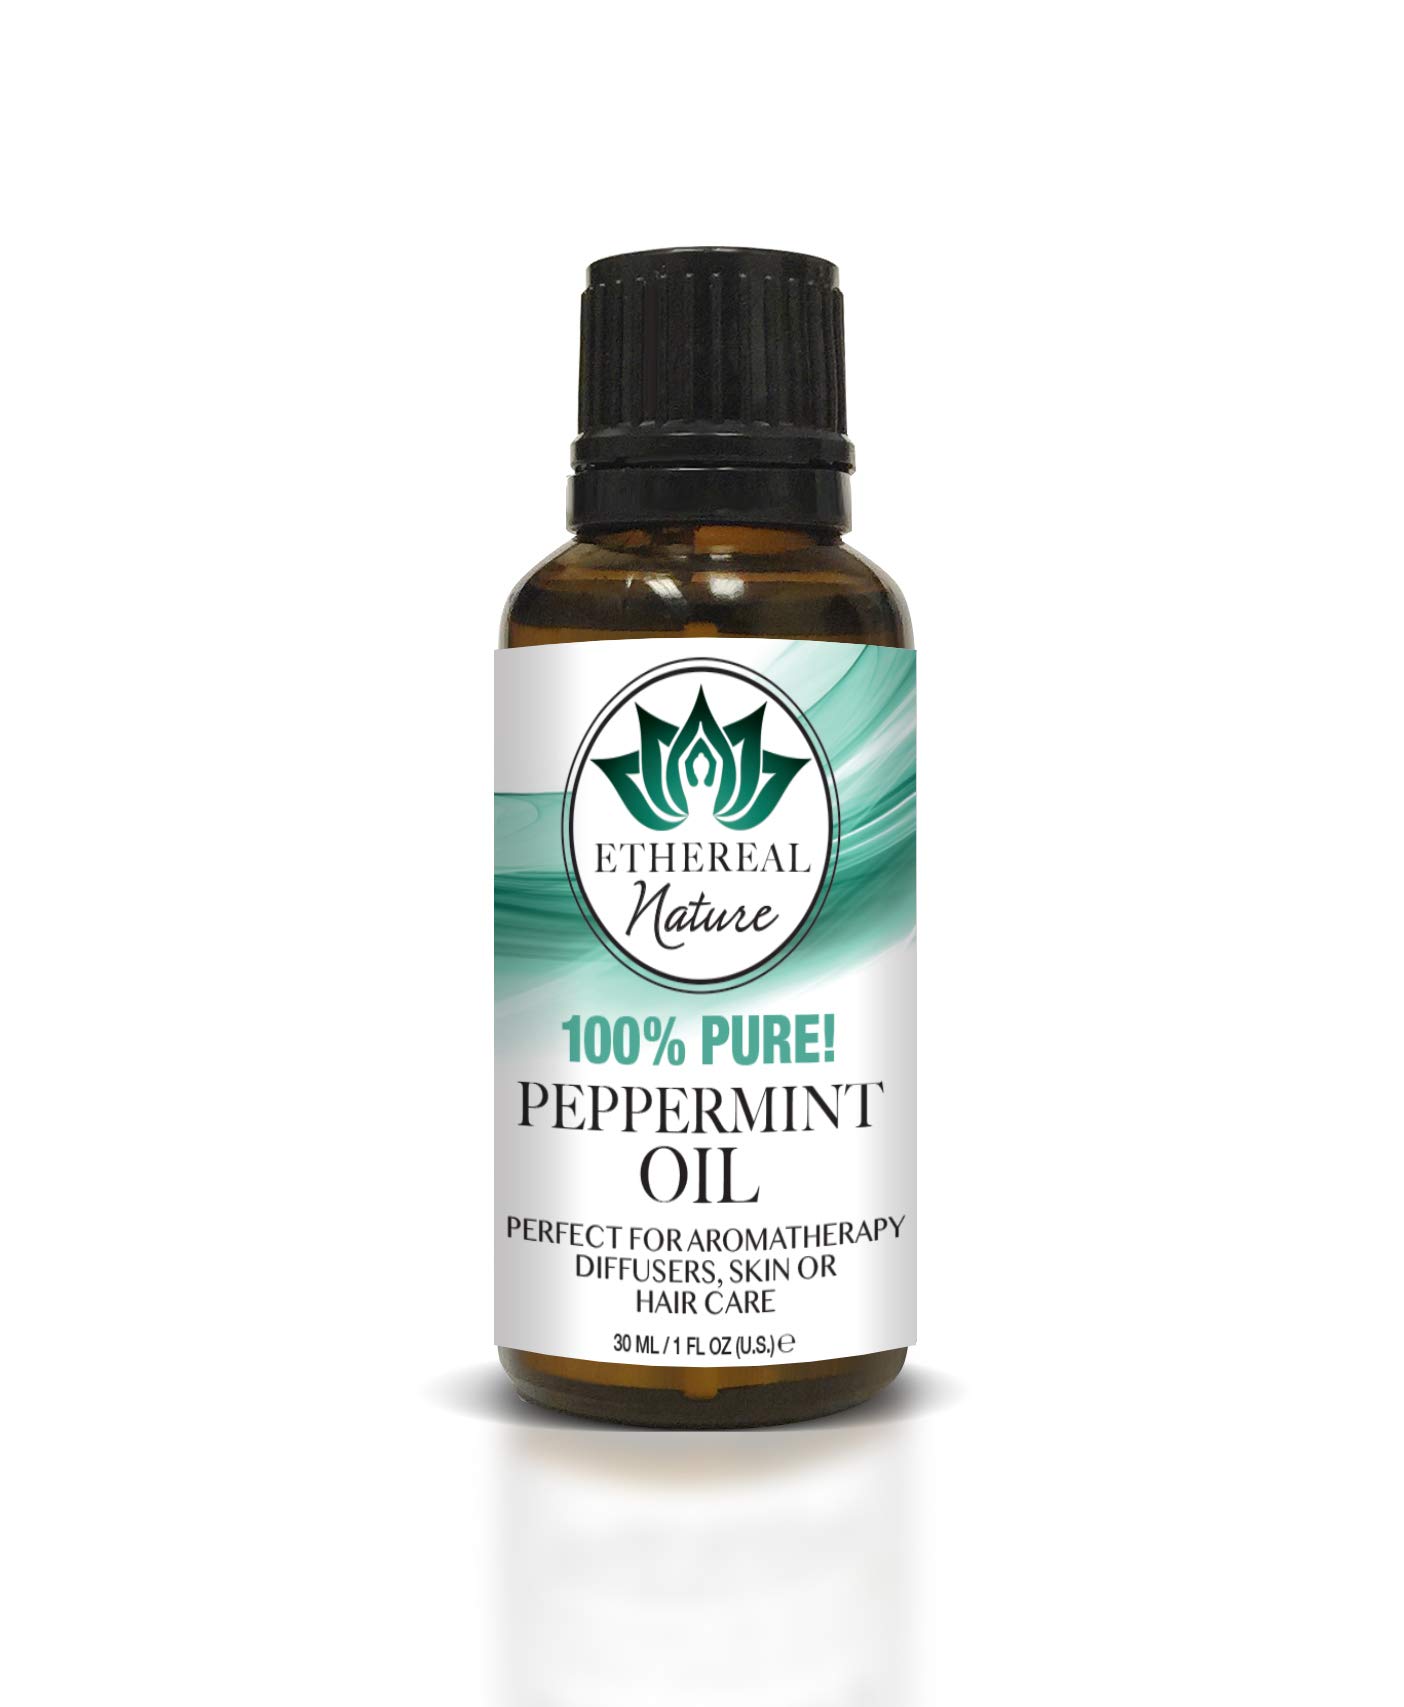 Ethereal Nature 100% Pure Oil, Peppermint, 1.01 Fluid Ounce